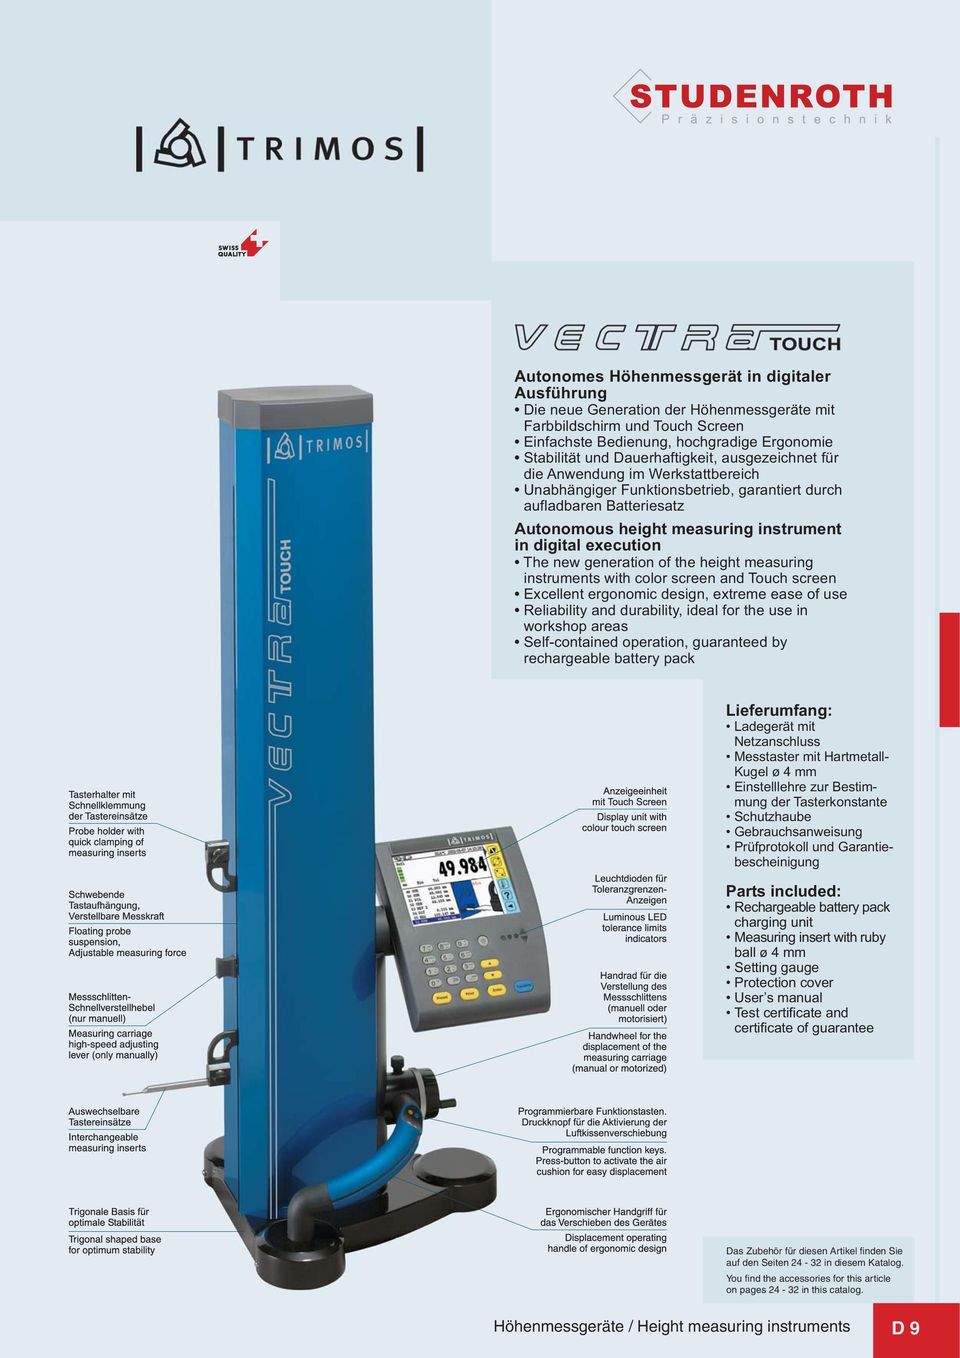 execution The new generation of the height measuring instruments with color screen and Touch screen Excellent ergonomic design, extreme ease of use Reliability and durability, ideal for the use in